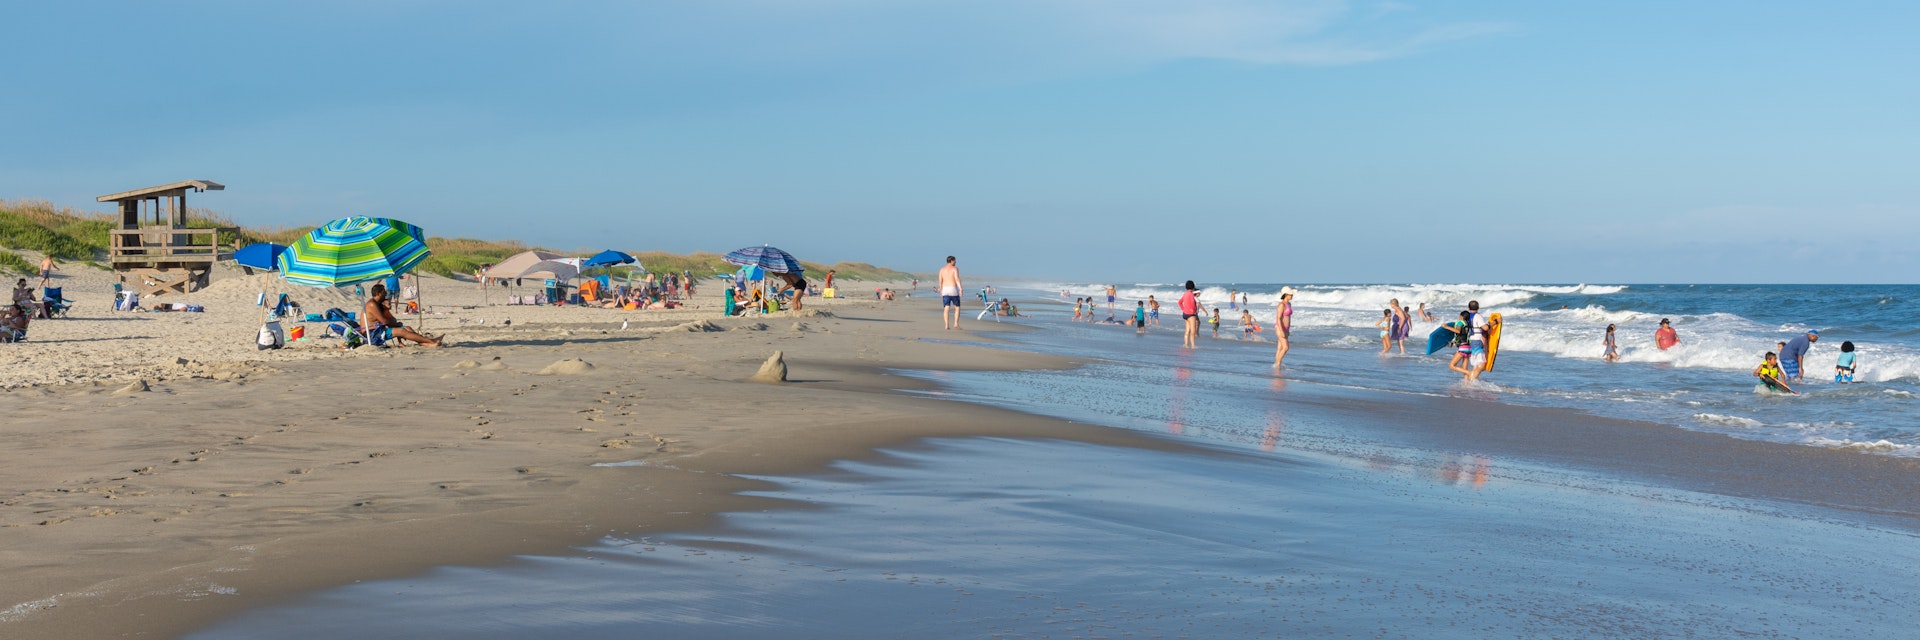 People relax on the beach and swim in the surf of the lifeguarded beach on Ocracoke Island.